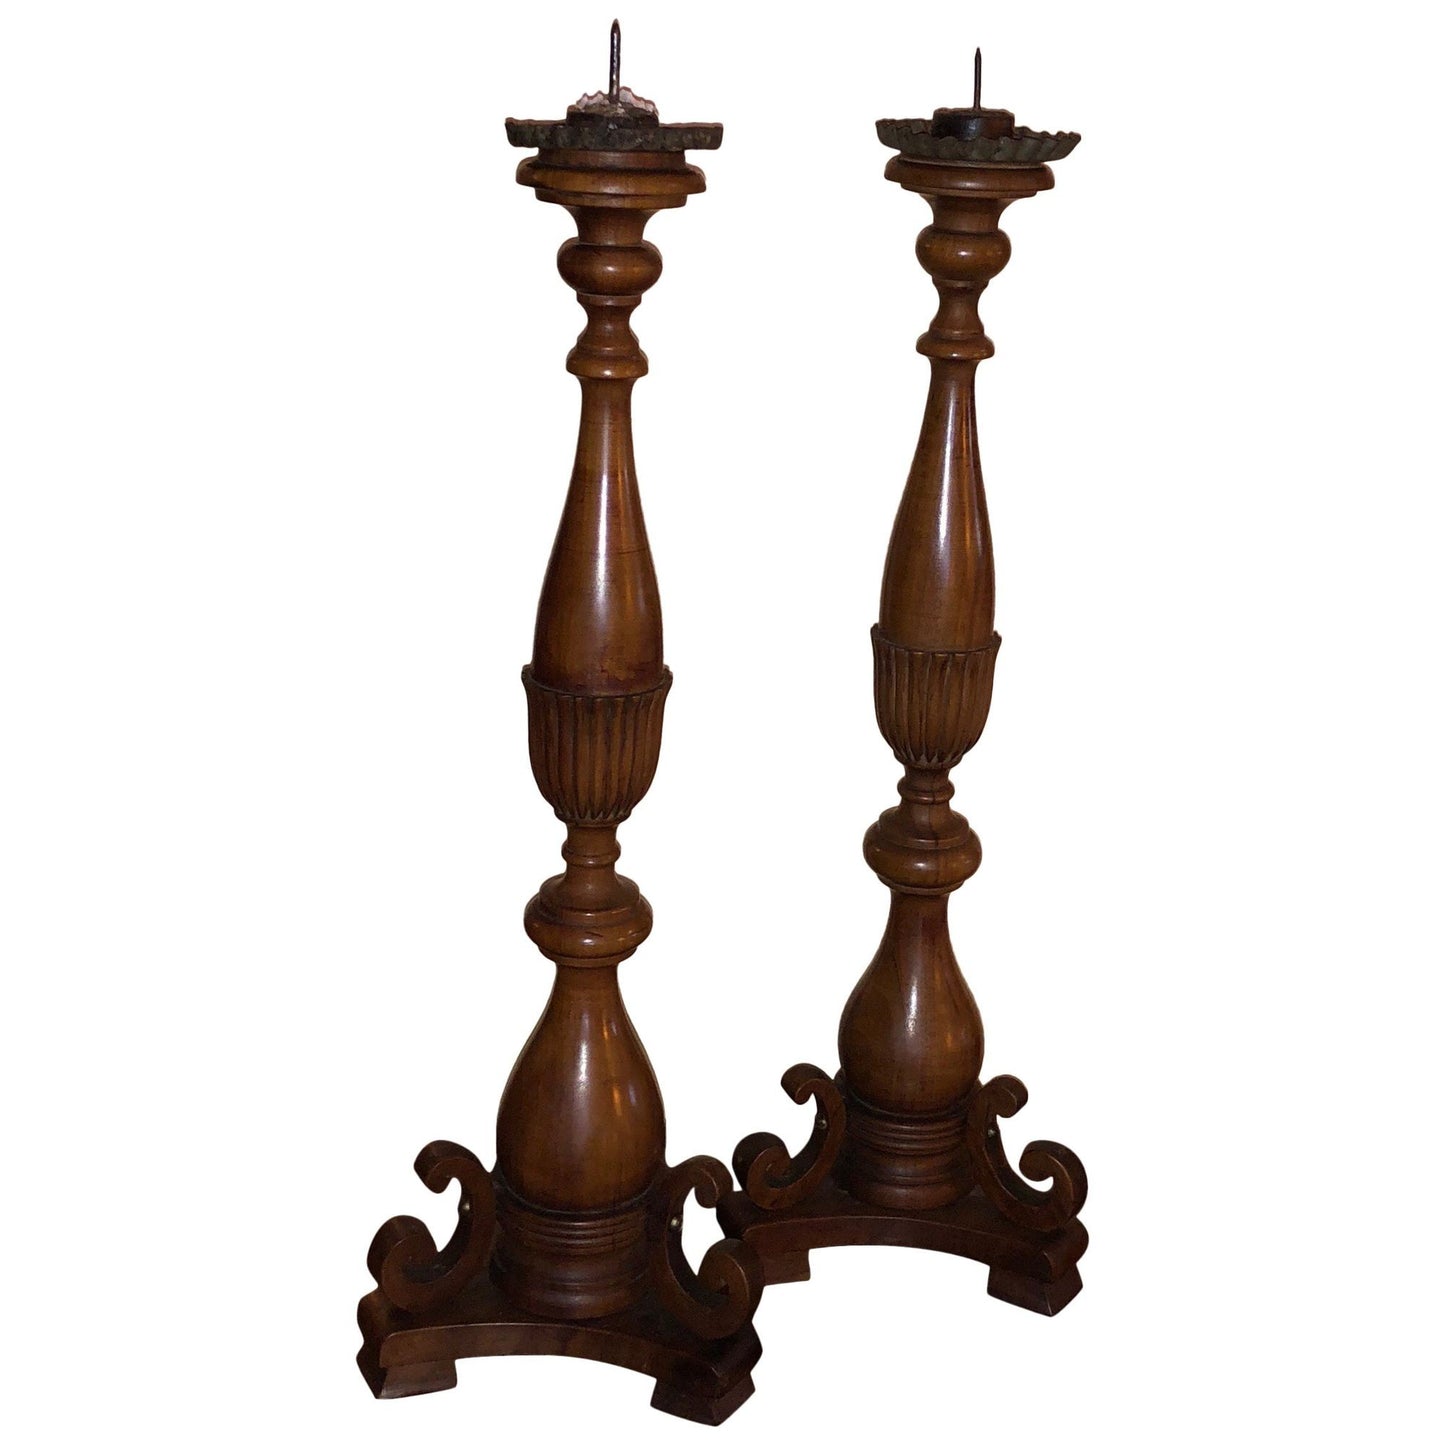 Pair of Pearwood Turned Candlesticks, French, 19th Century